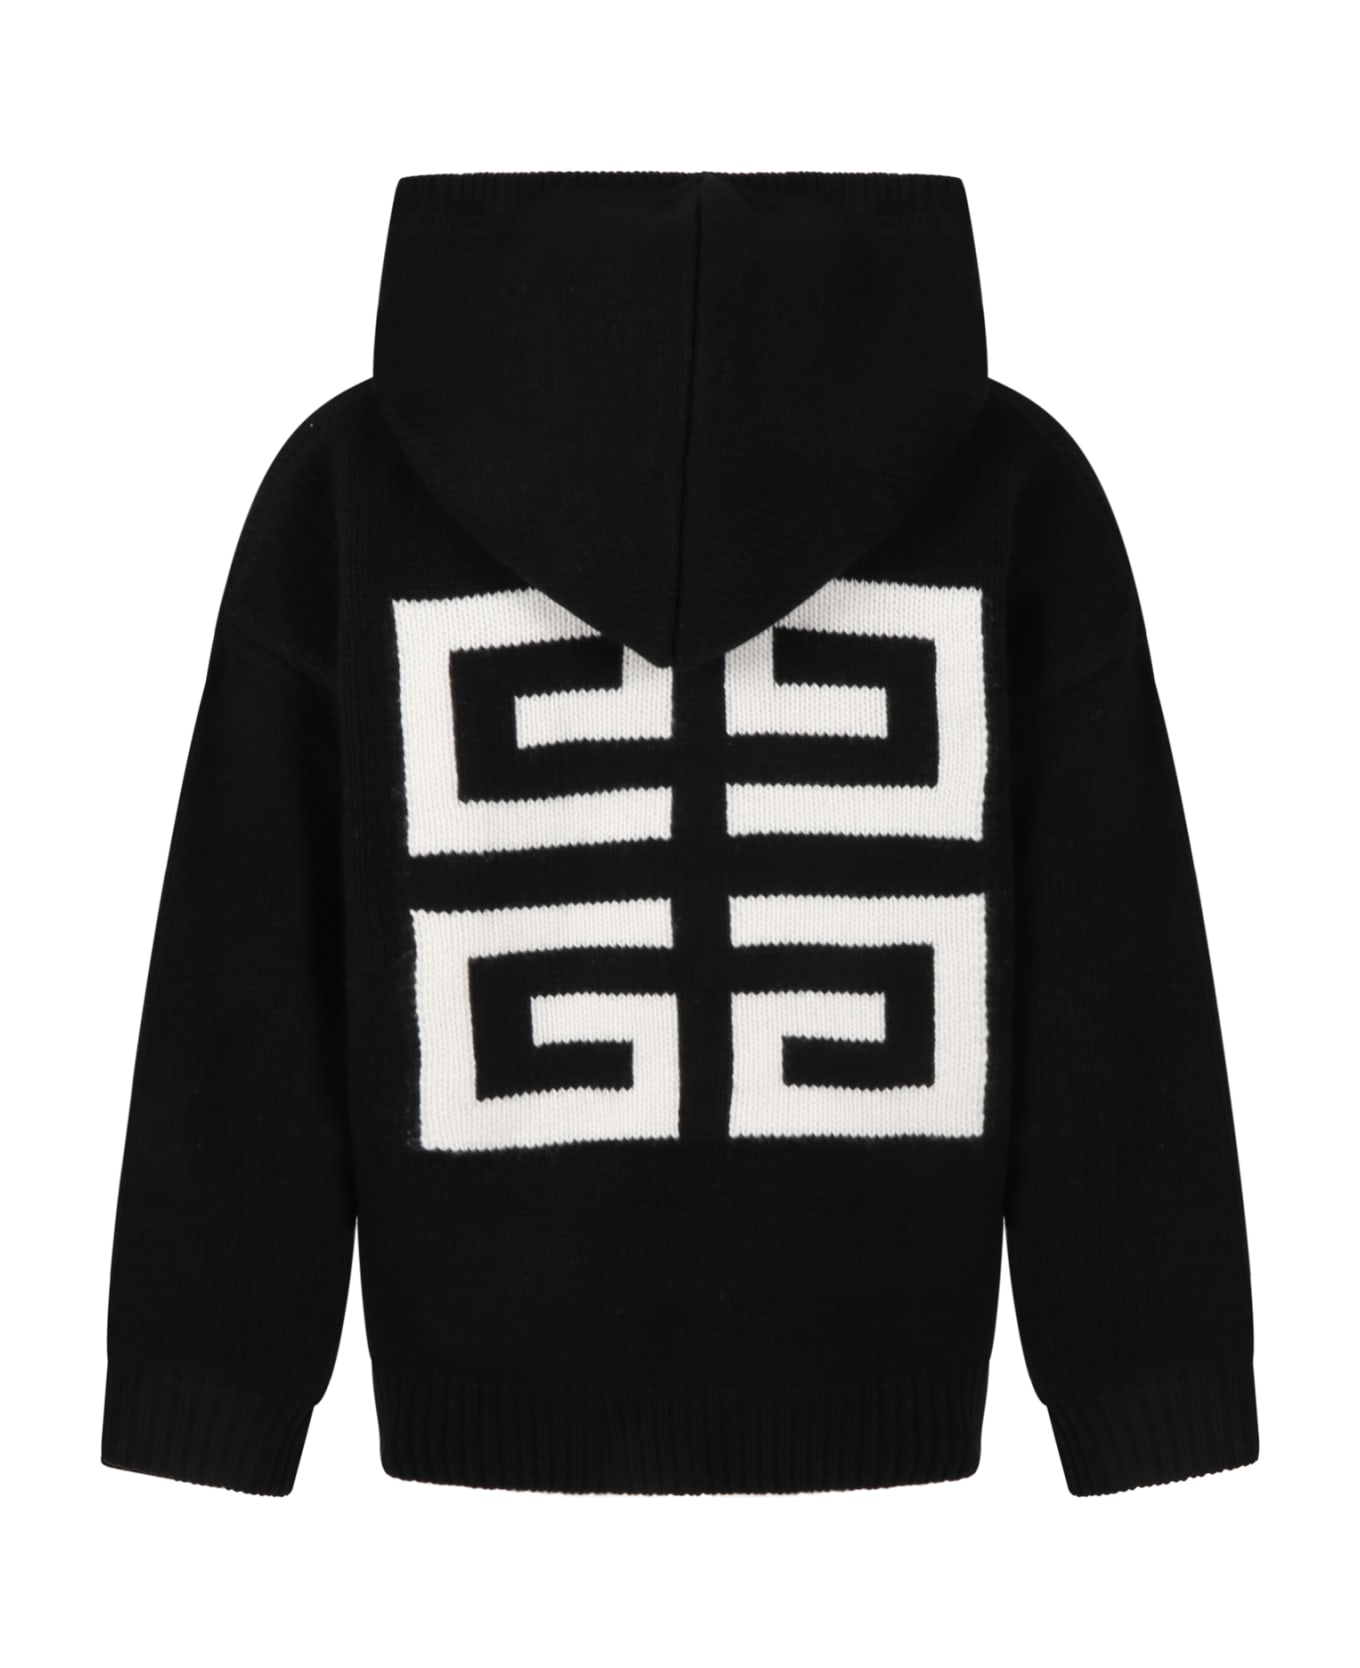 Givenchy Black Sweater For Kids With Logo - Black